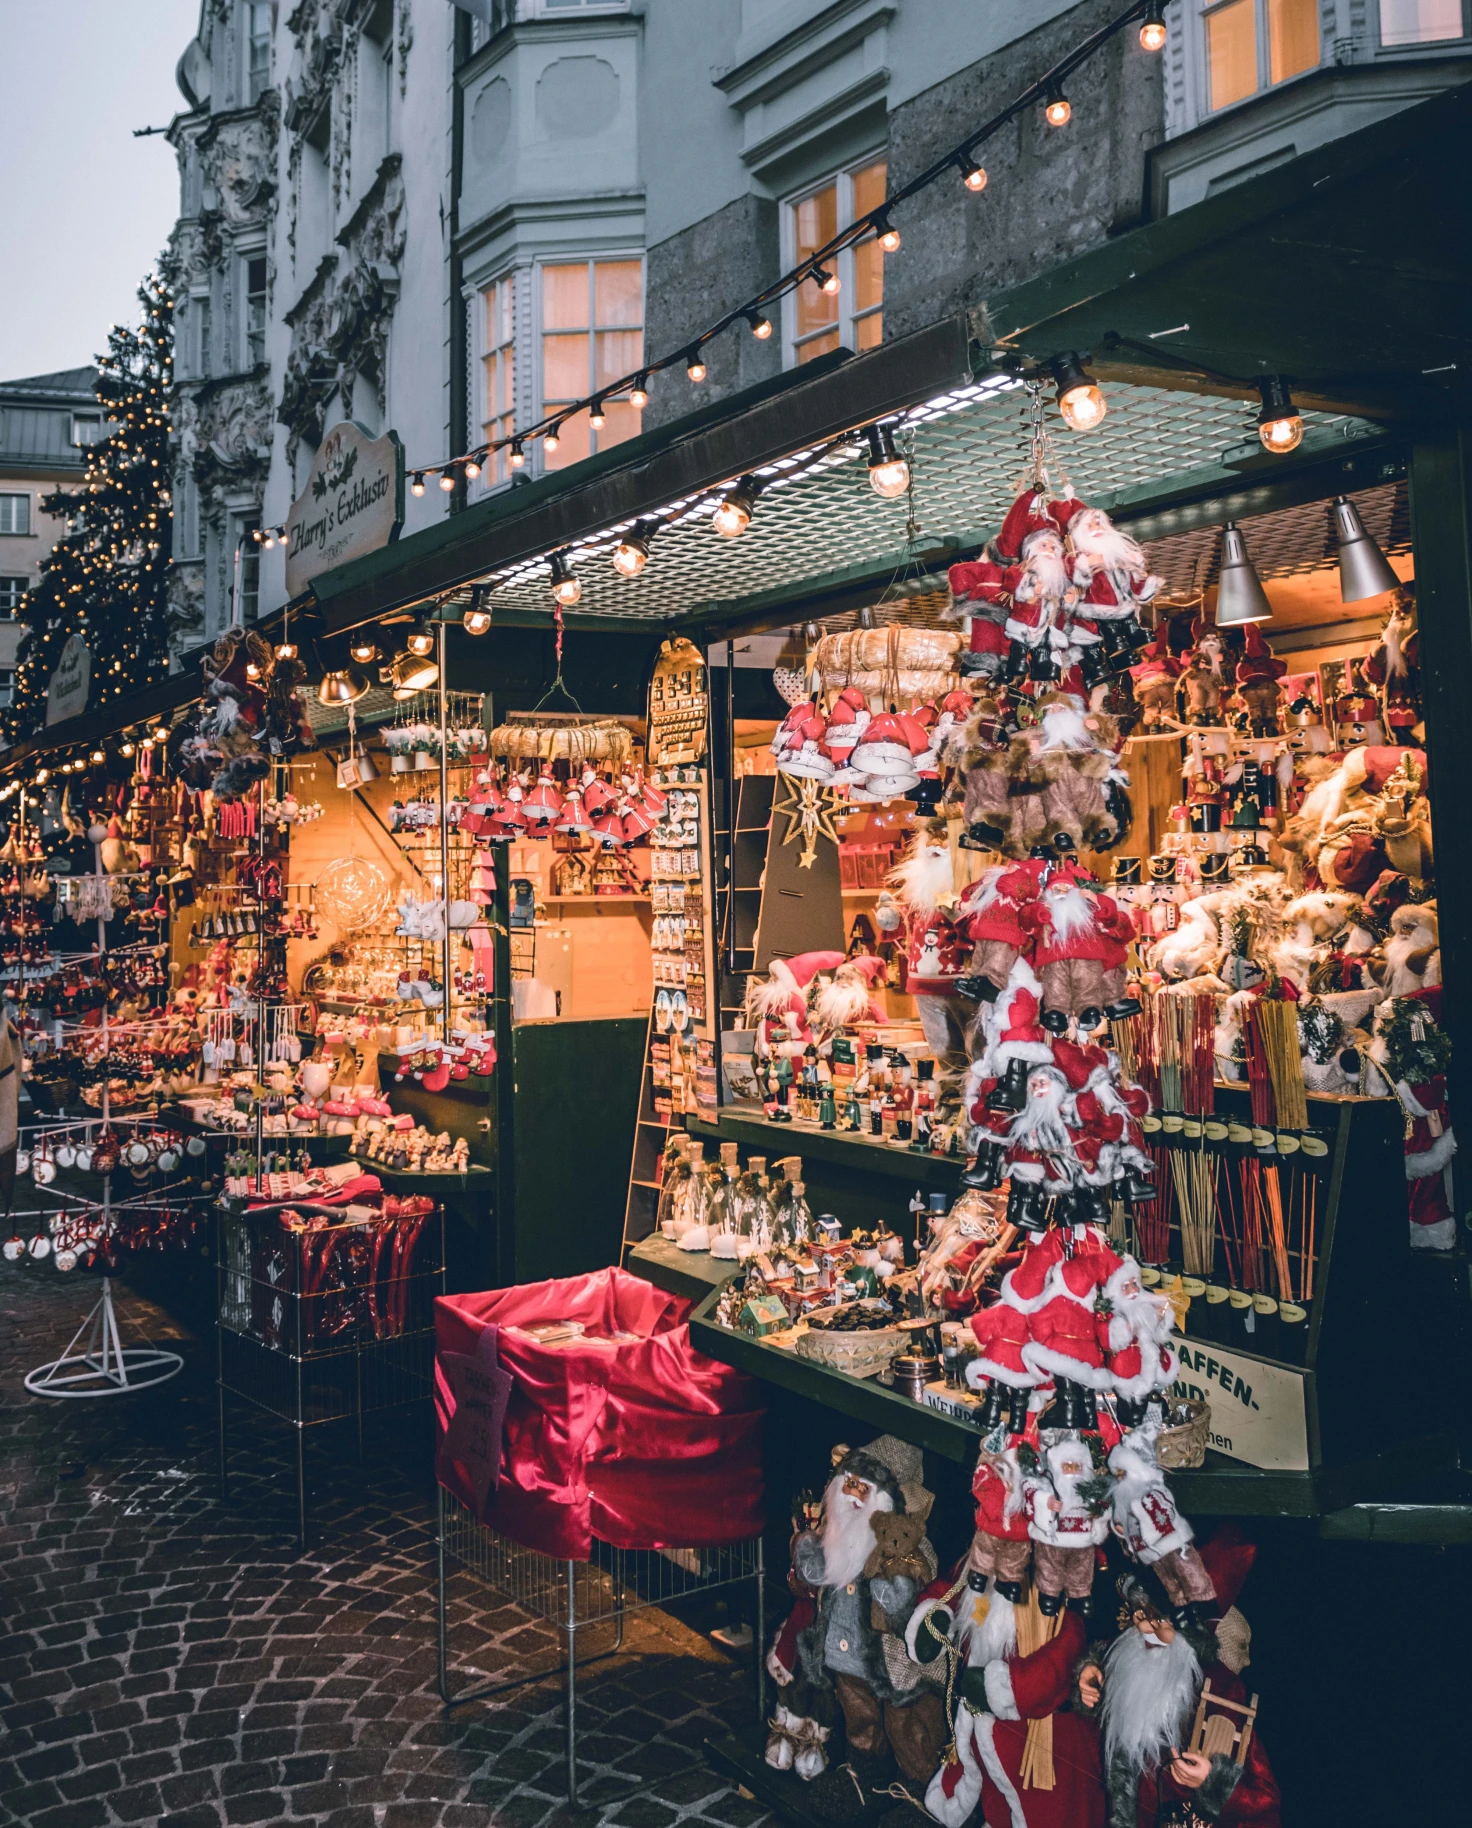 market with Christmas decorations